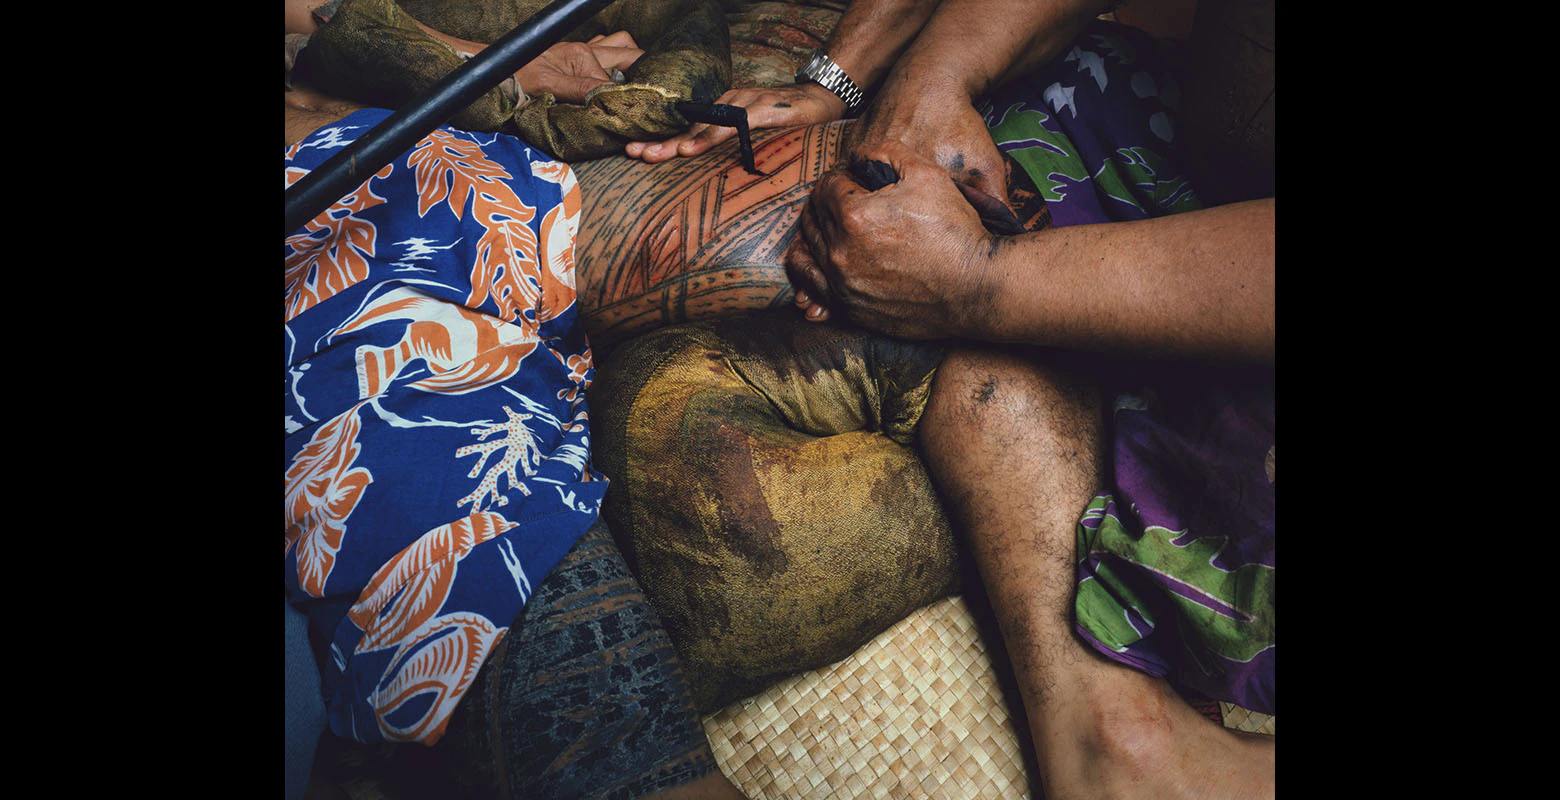 Close-up of a person getting a Samoan tattoo